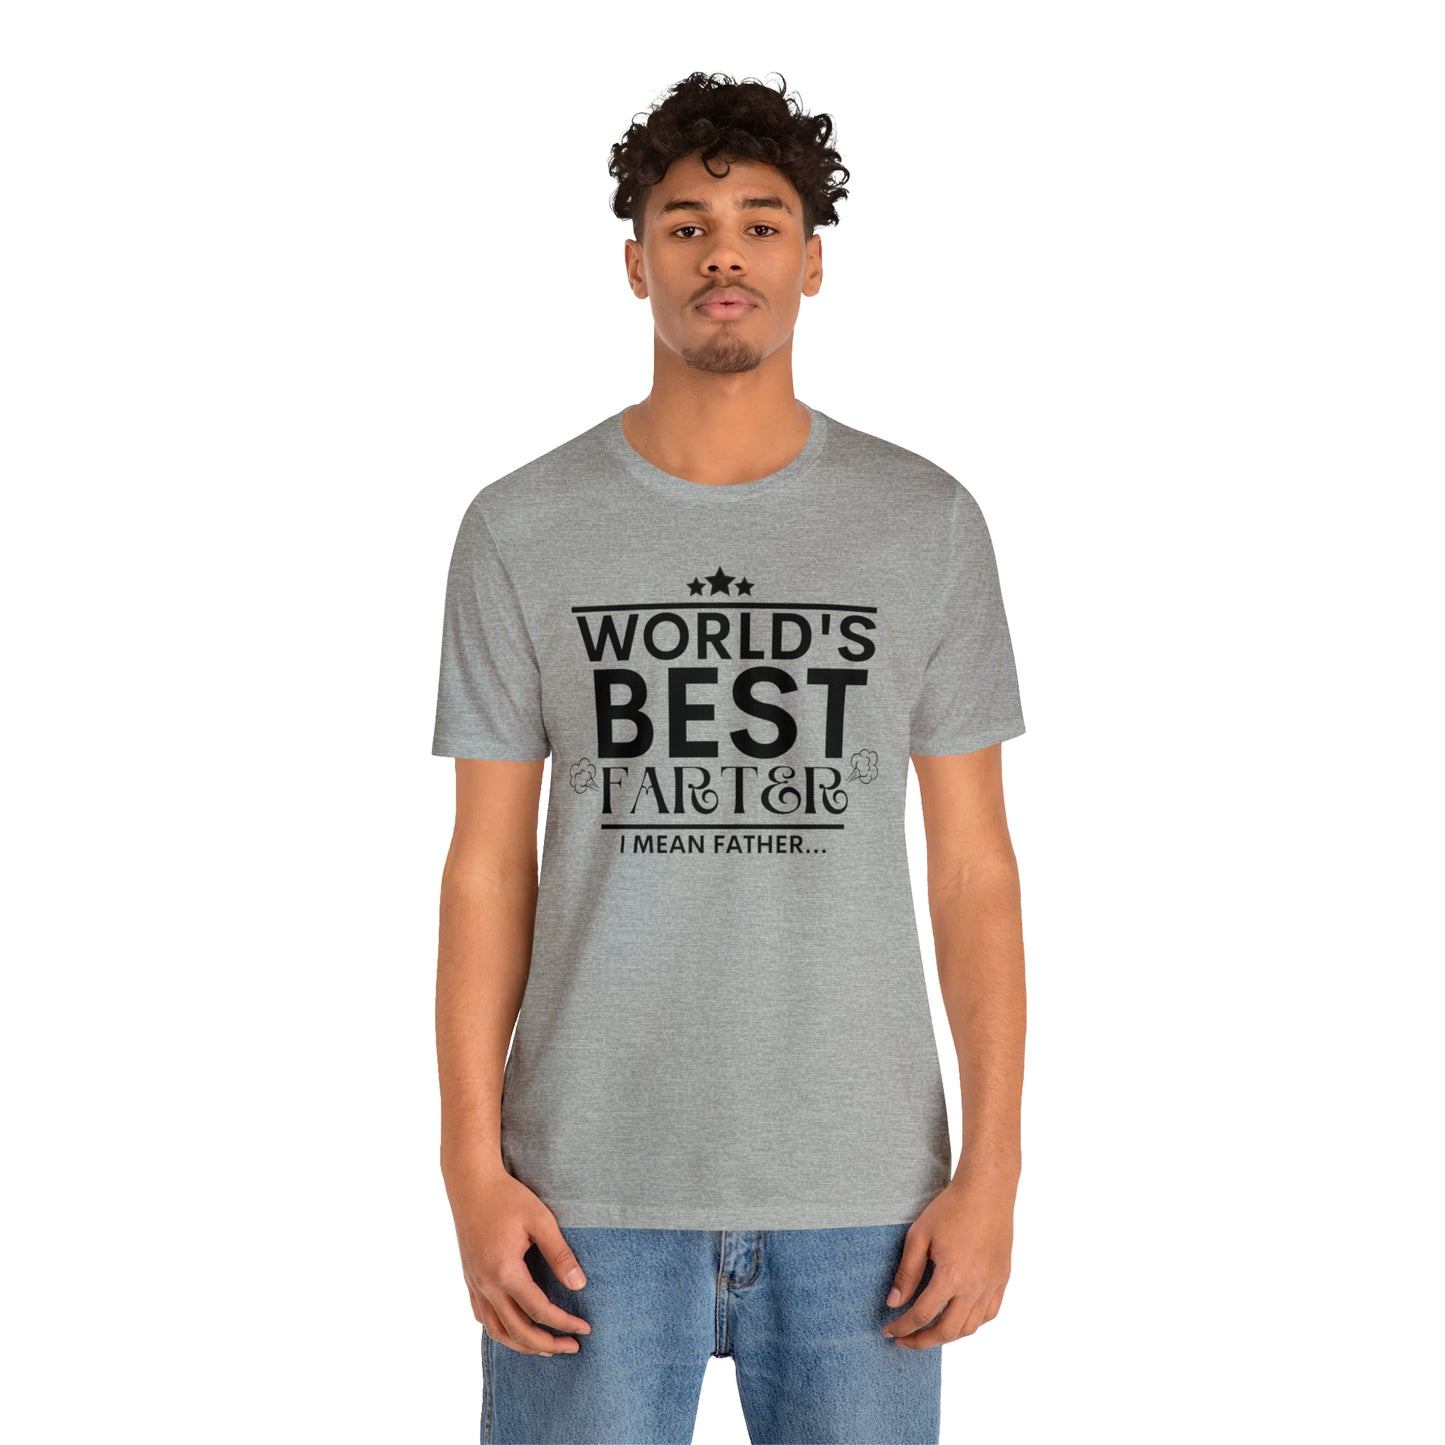 World's Best Farter T-shirt | Funny Dad T-shirt, Father's Day Gift, T-shirt For Dad, Best Dad Tee